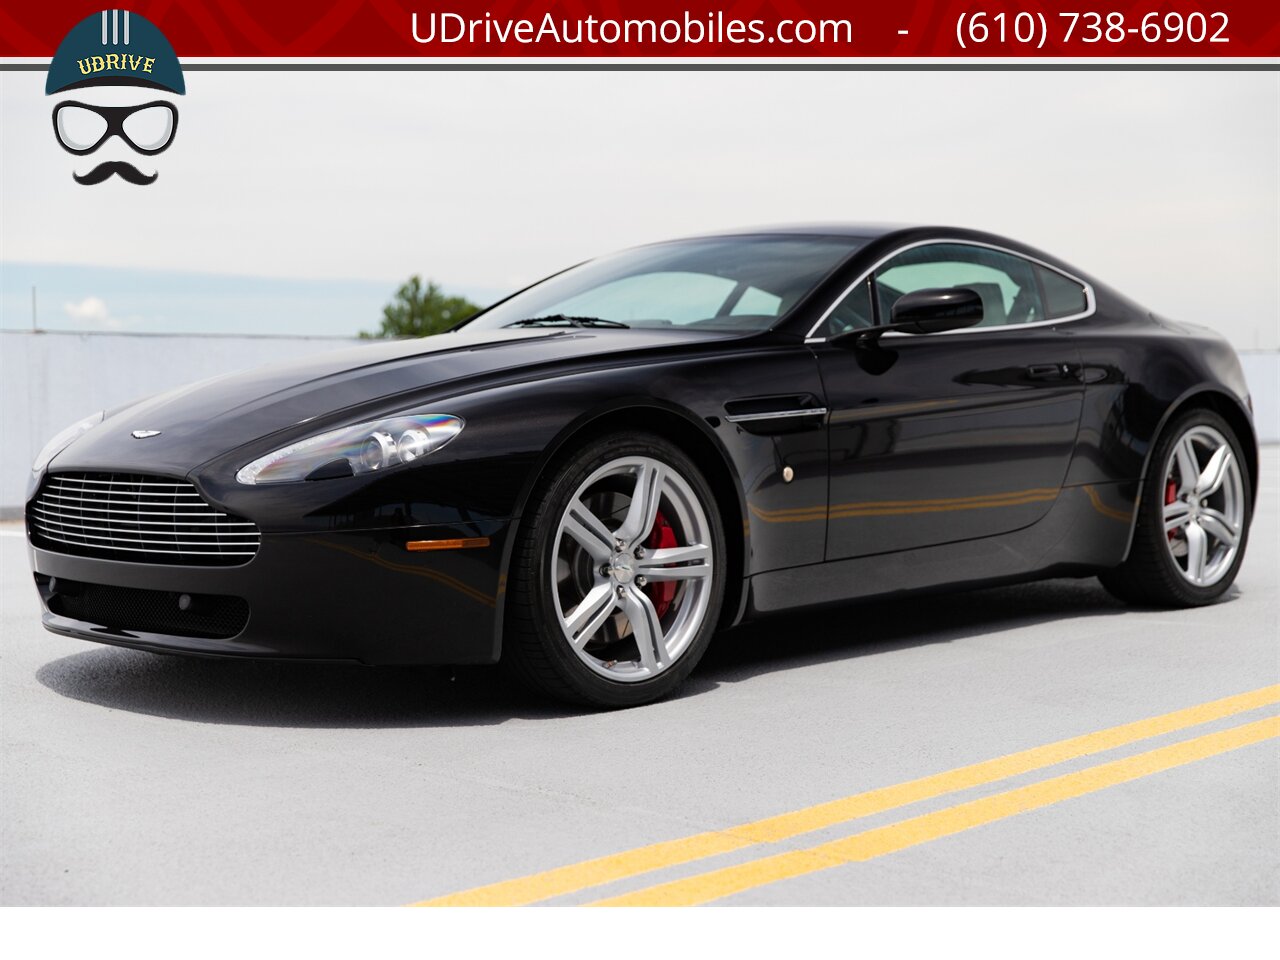 2009 Aston Martin Vantage 6 Speed Manual 1 Owner 12k Miles Sprts Pack NAV  $136,470 MSRP Red Calipers - Photo 10 - West Chester, PA 19382